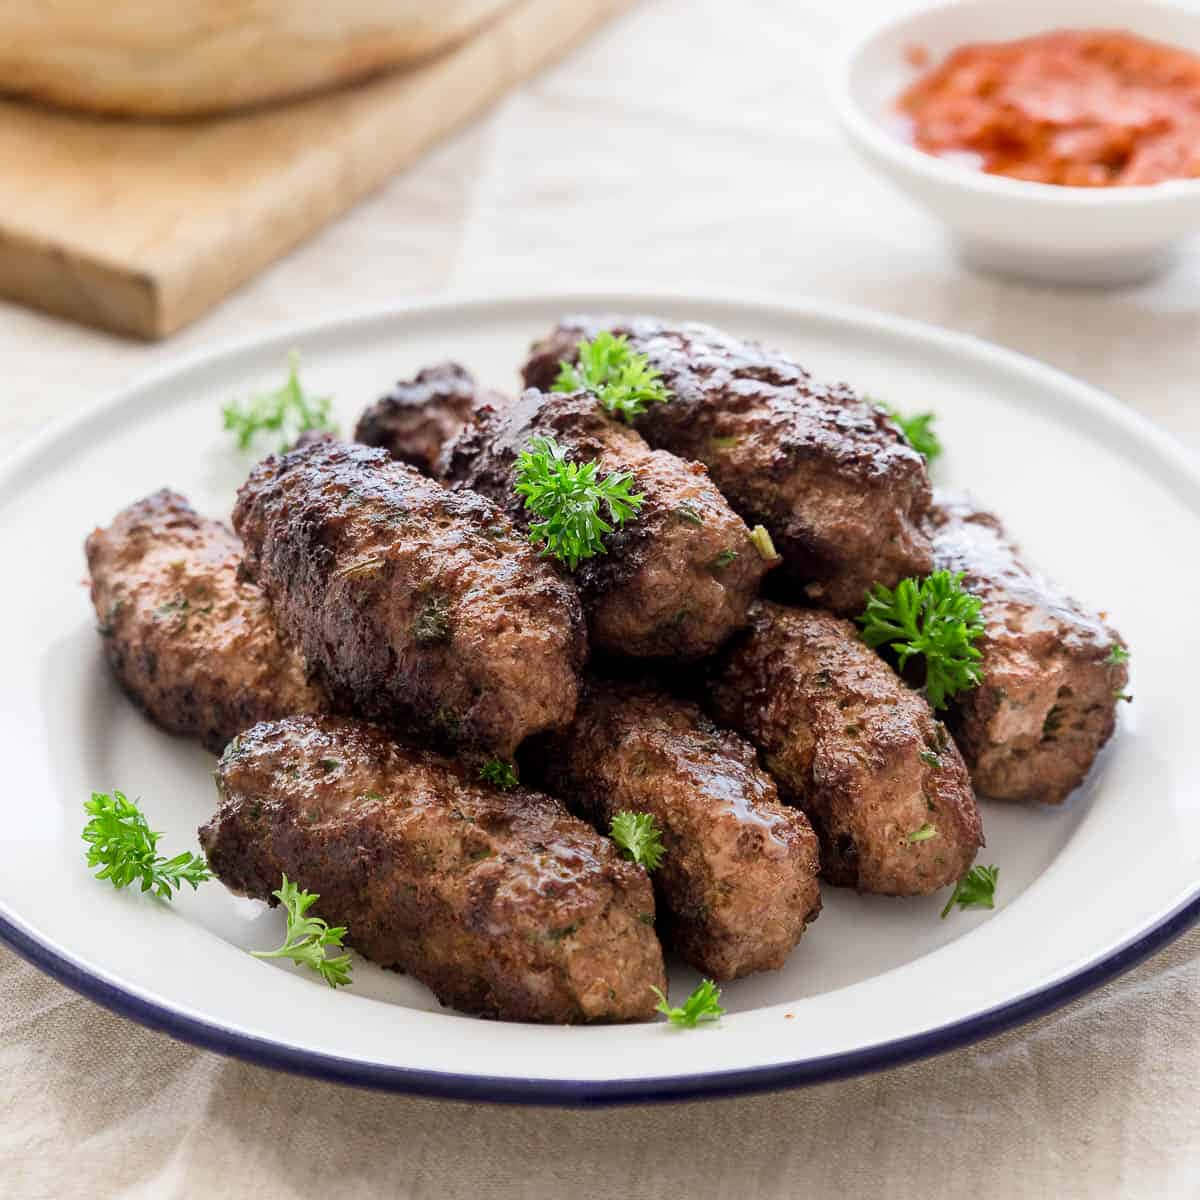 Delicious Fried Ćevapi Sausages Garnished with Fresh Herbs Wallpaper